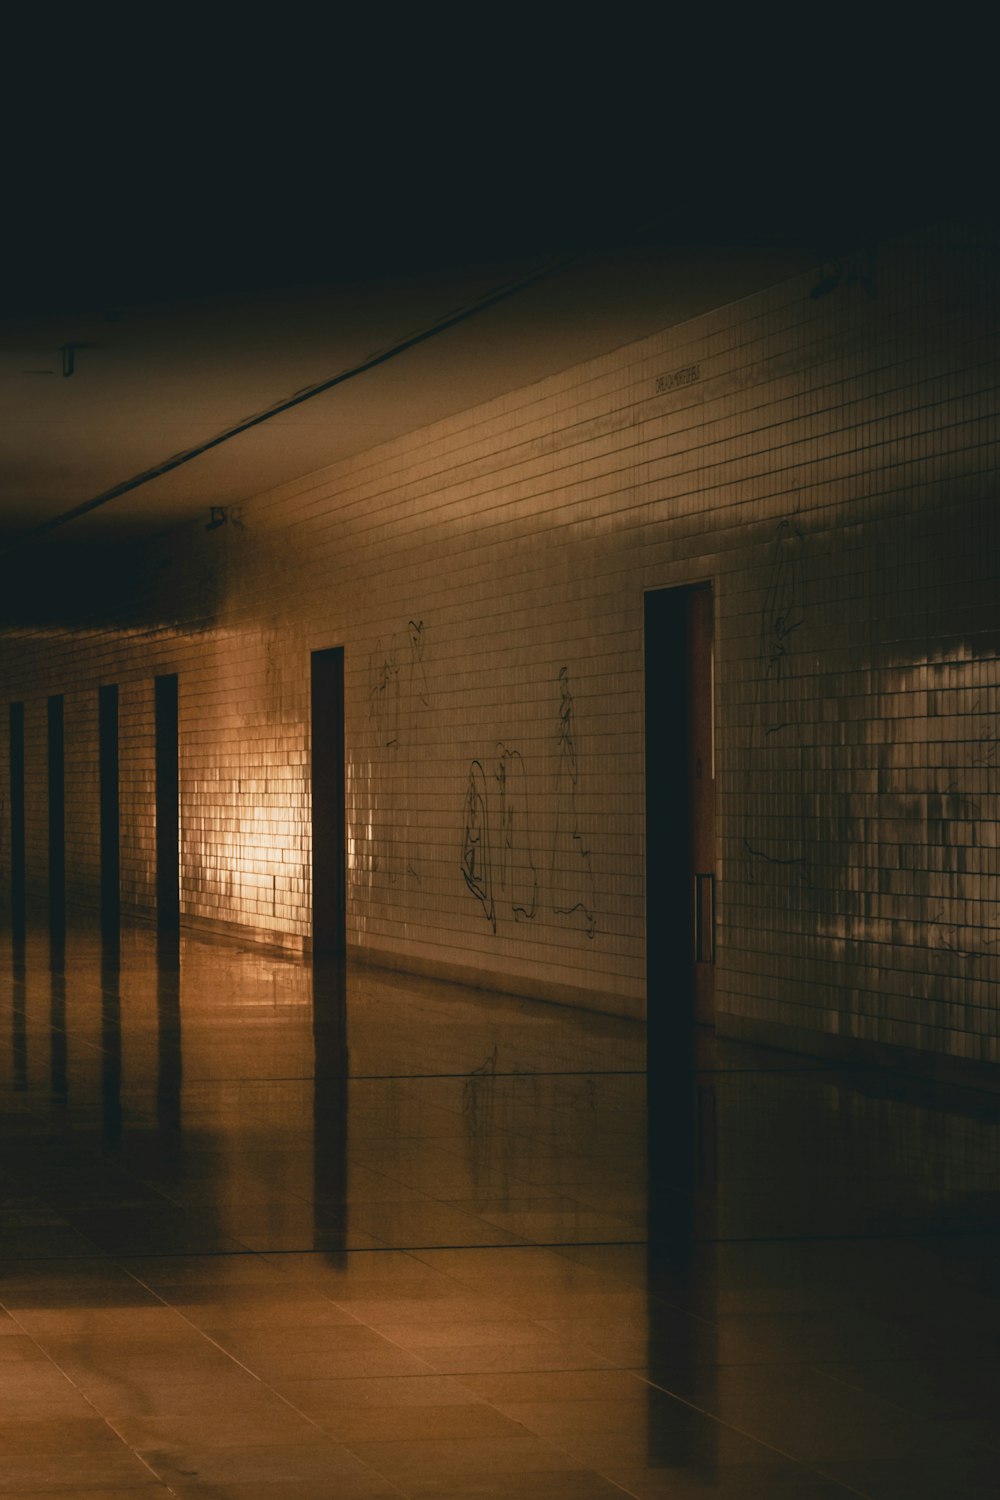 a dimly lit hallway in a building with graffiti on the walls